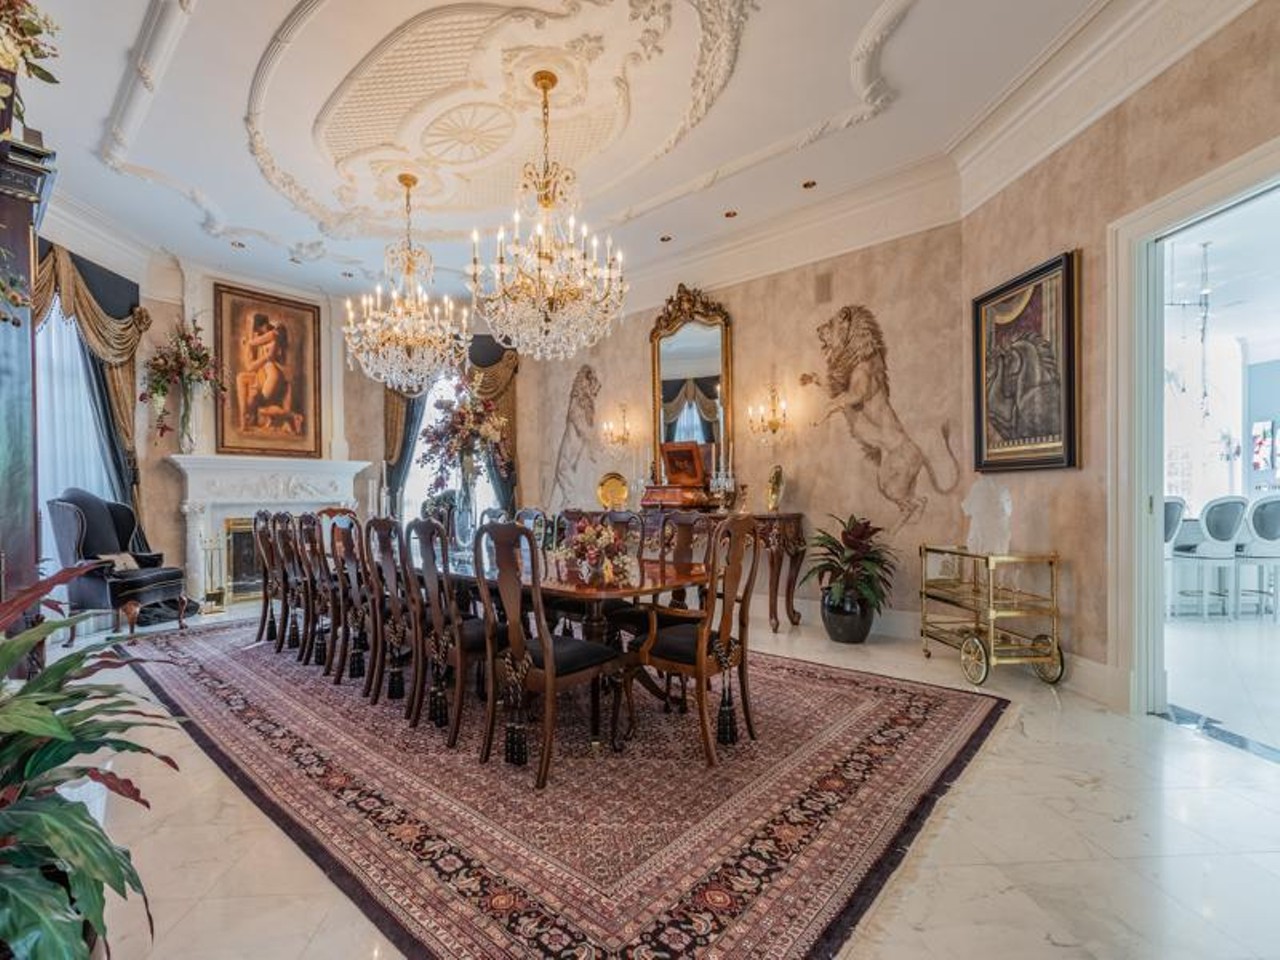 This Southern Indiana Mansion Looks Like The White House [PHOTOS]